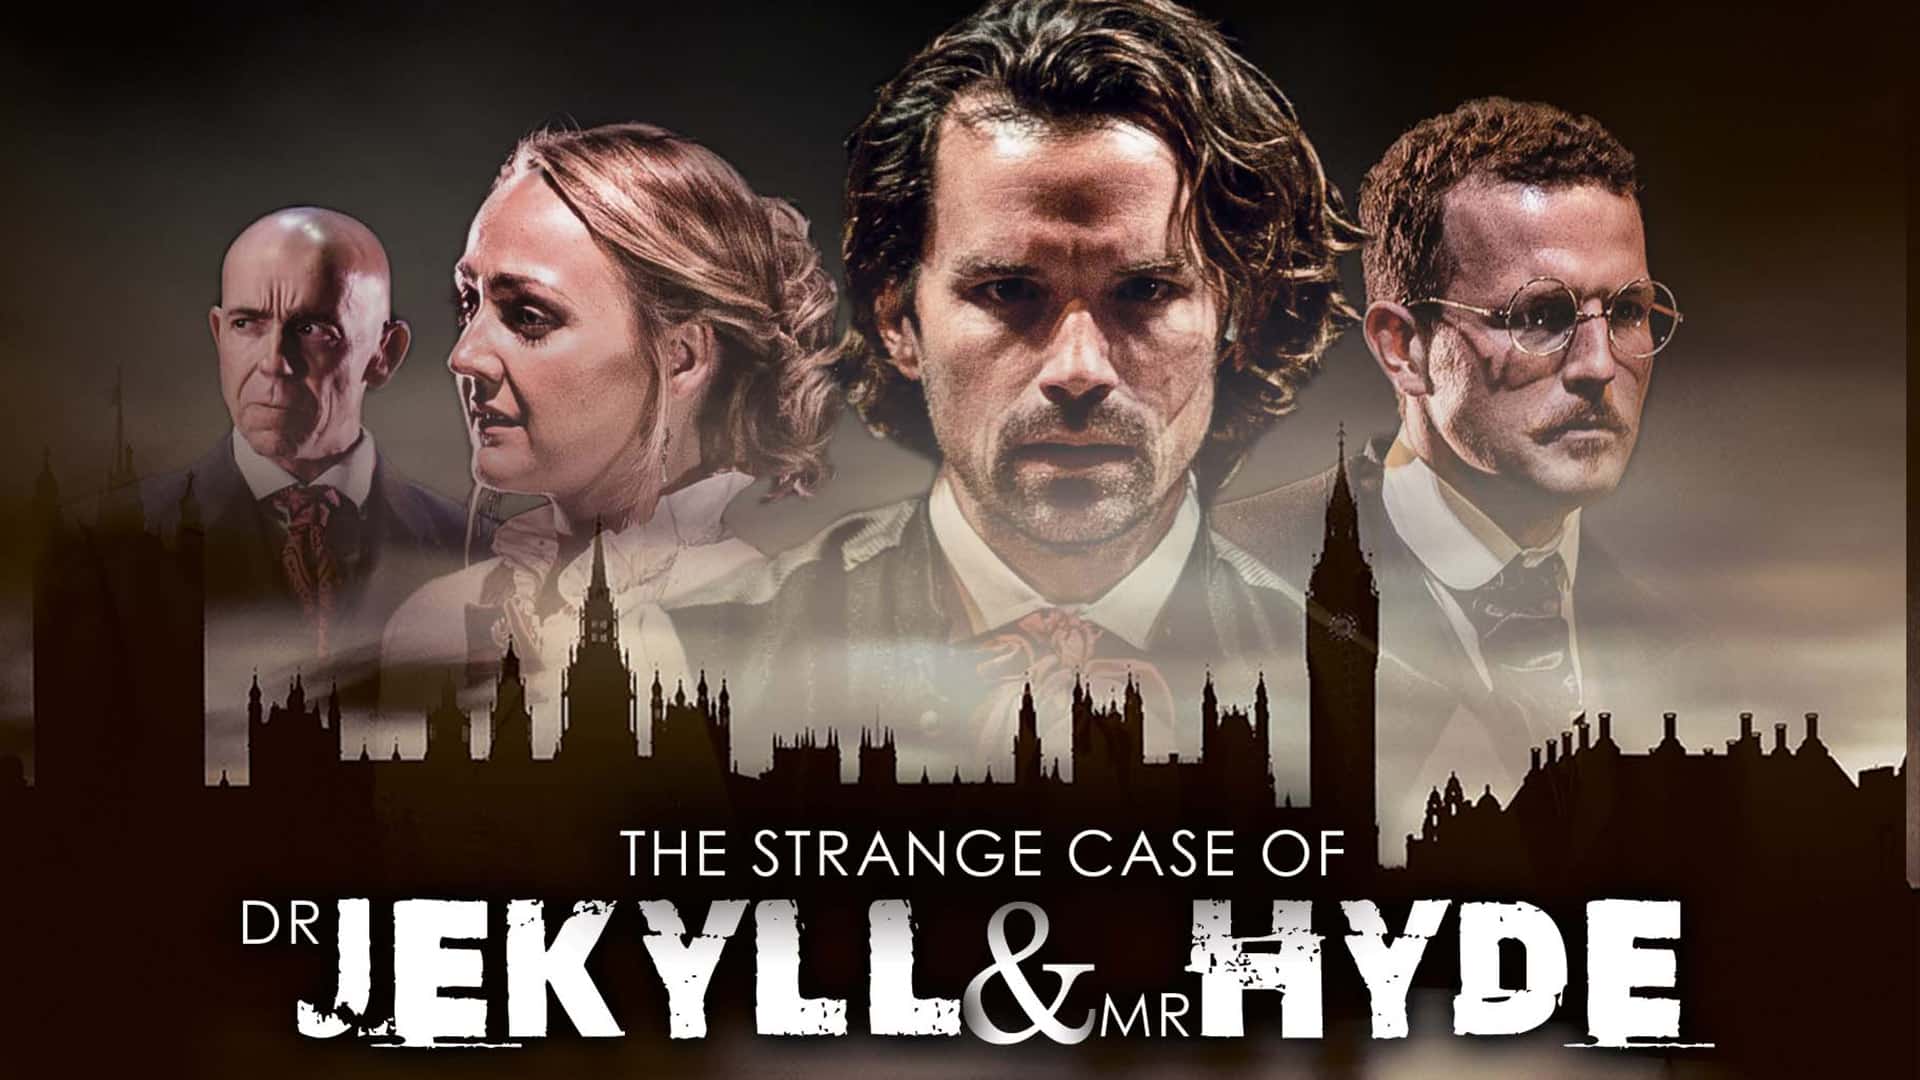 The Strange Case of Dr Jekyll & Mr Hyde promotional image featuring 4 main characters